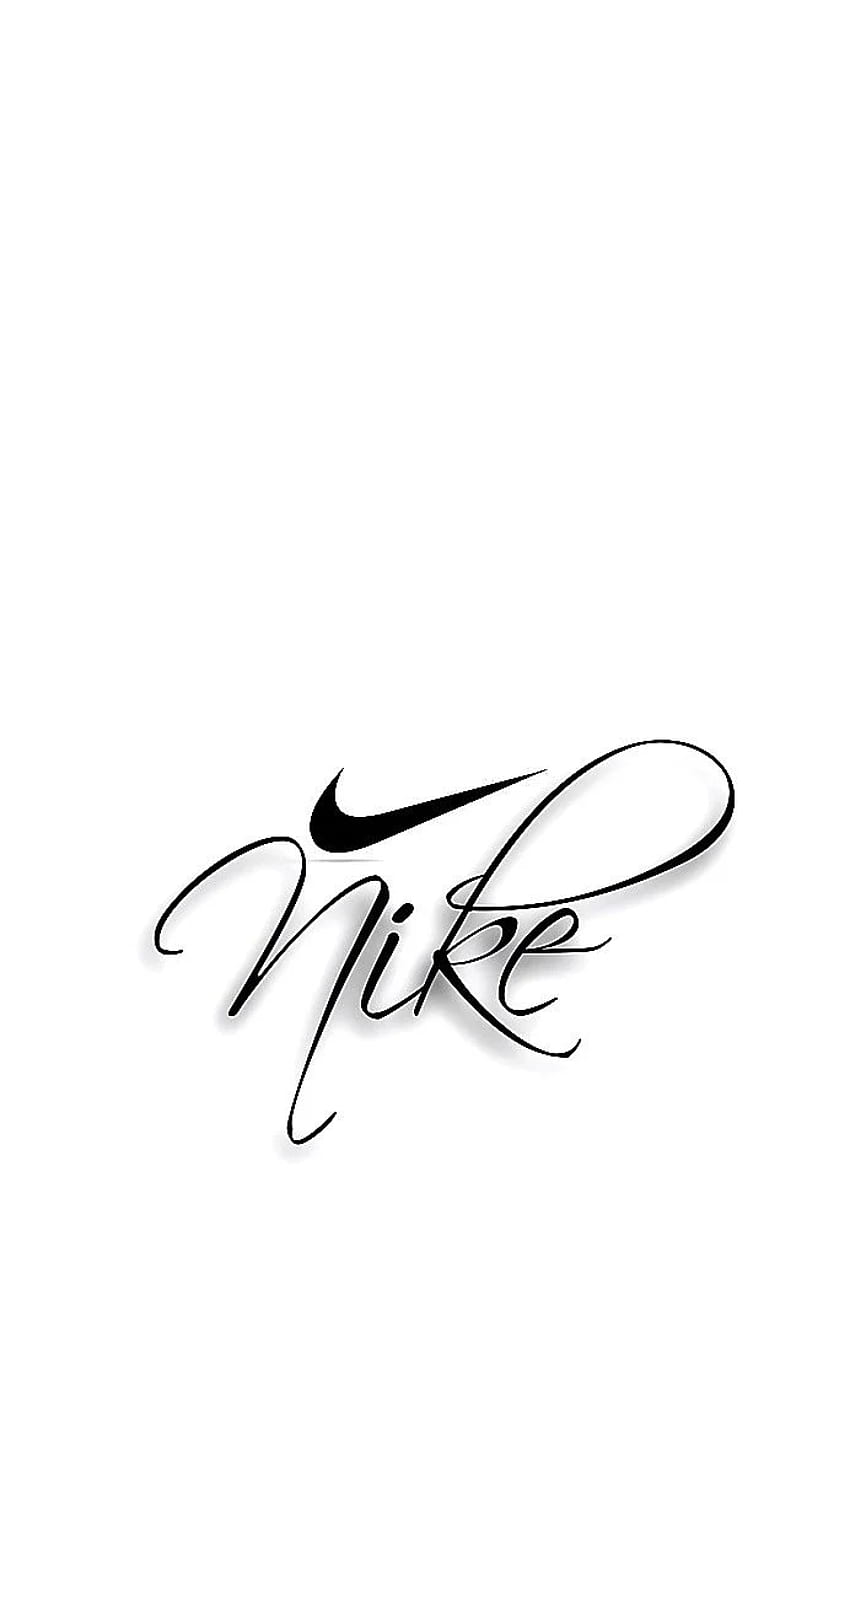 Nike iPhone X wallpaper You can order iphone case with this picture Just  click on picture   Nike wallpaper Nike wallpaper iphone Motorola  wallpapers